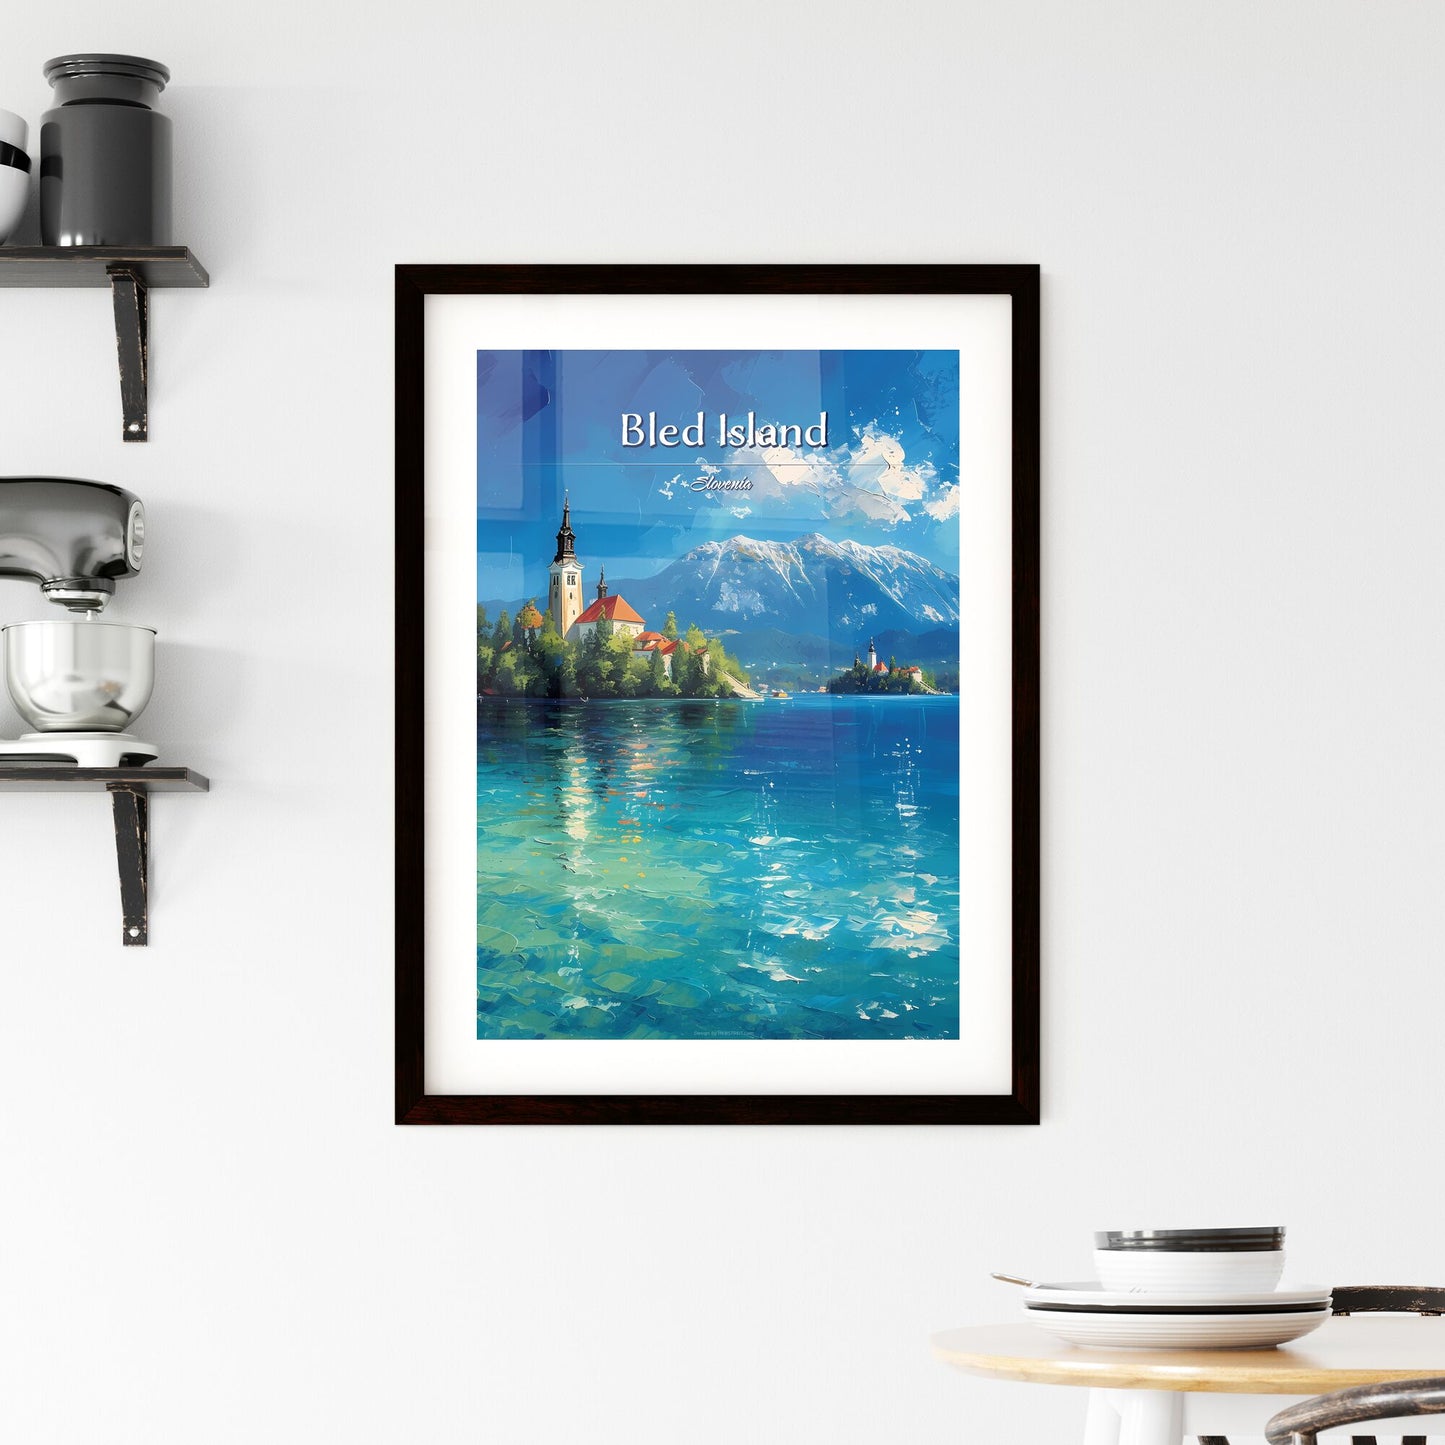 Bled Island, Slovenia - Art print of a building on an island in a body of water Default Title